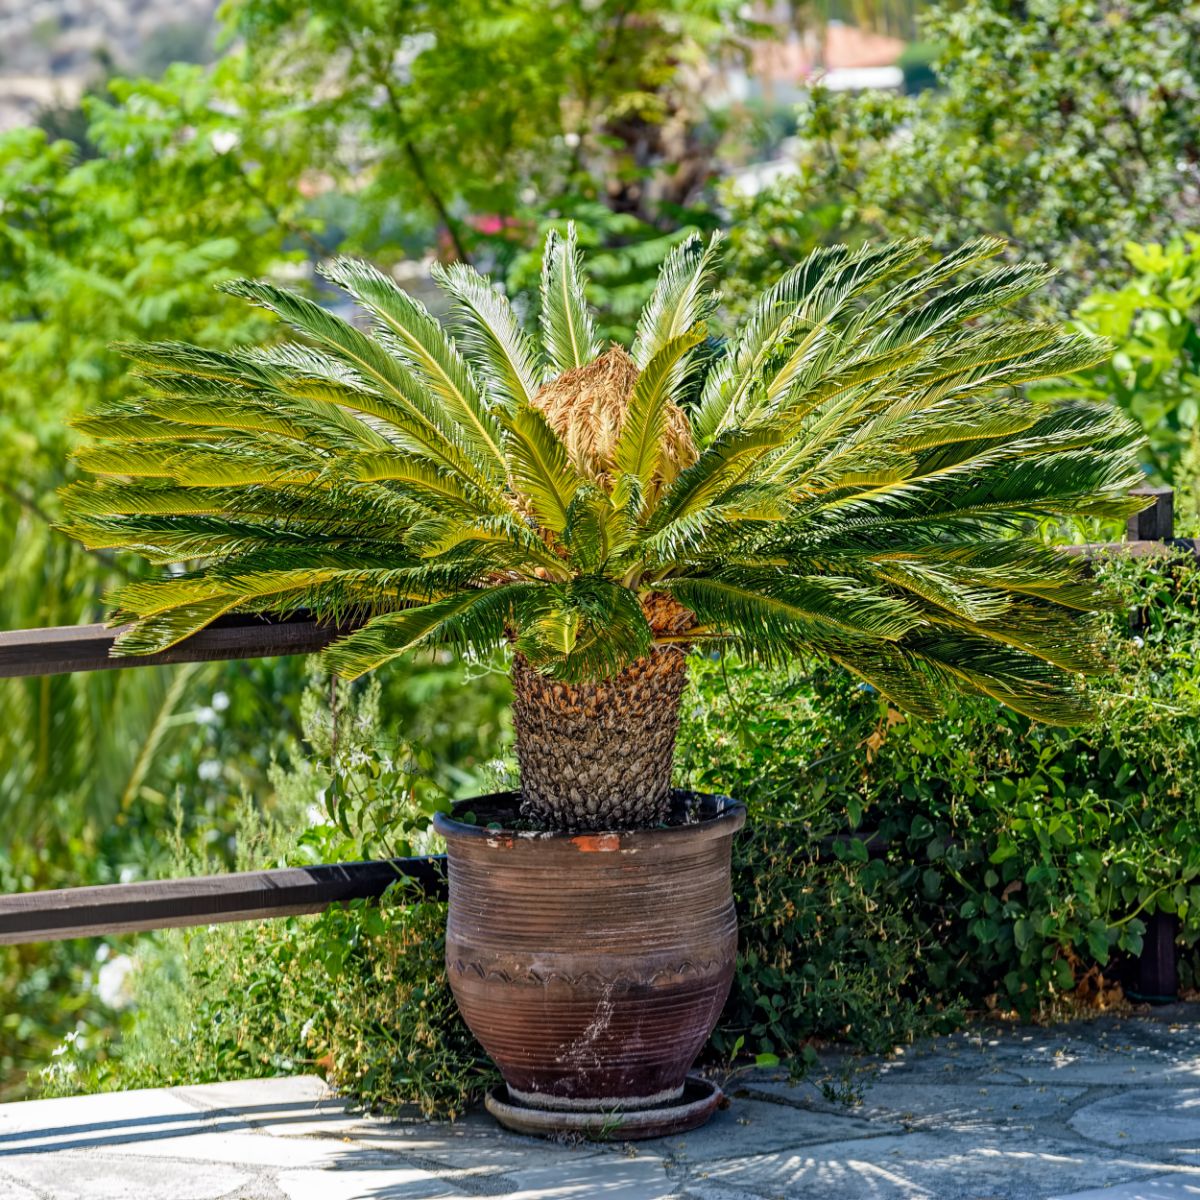 Sago Palm in a brown pot on a balcony.